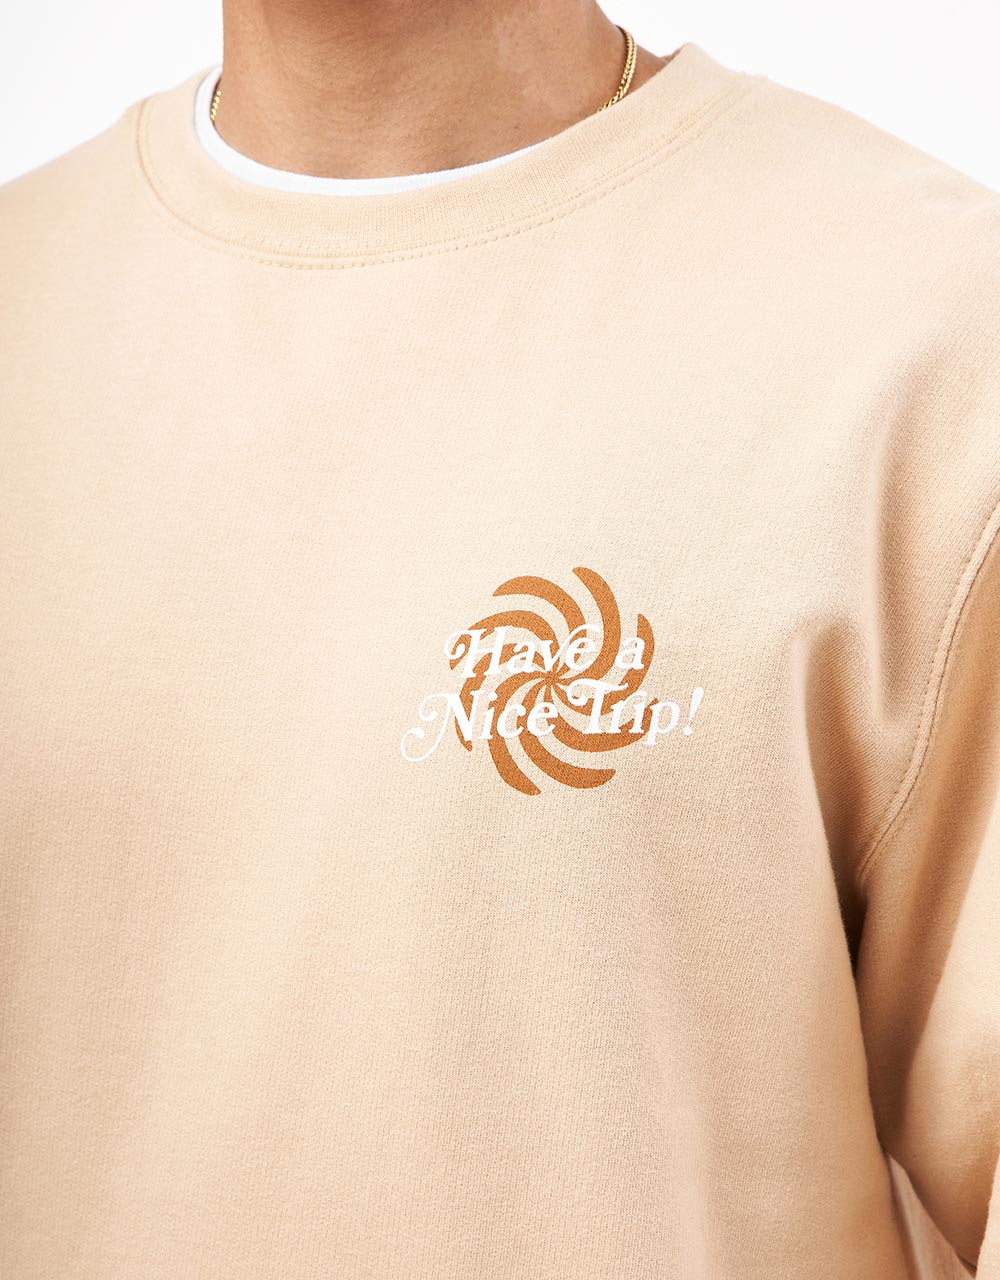 Route One Have A Nice Trip Sweatshirt - Nude